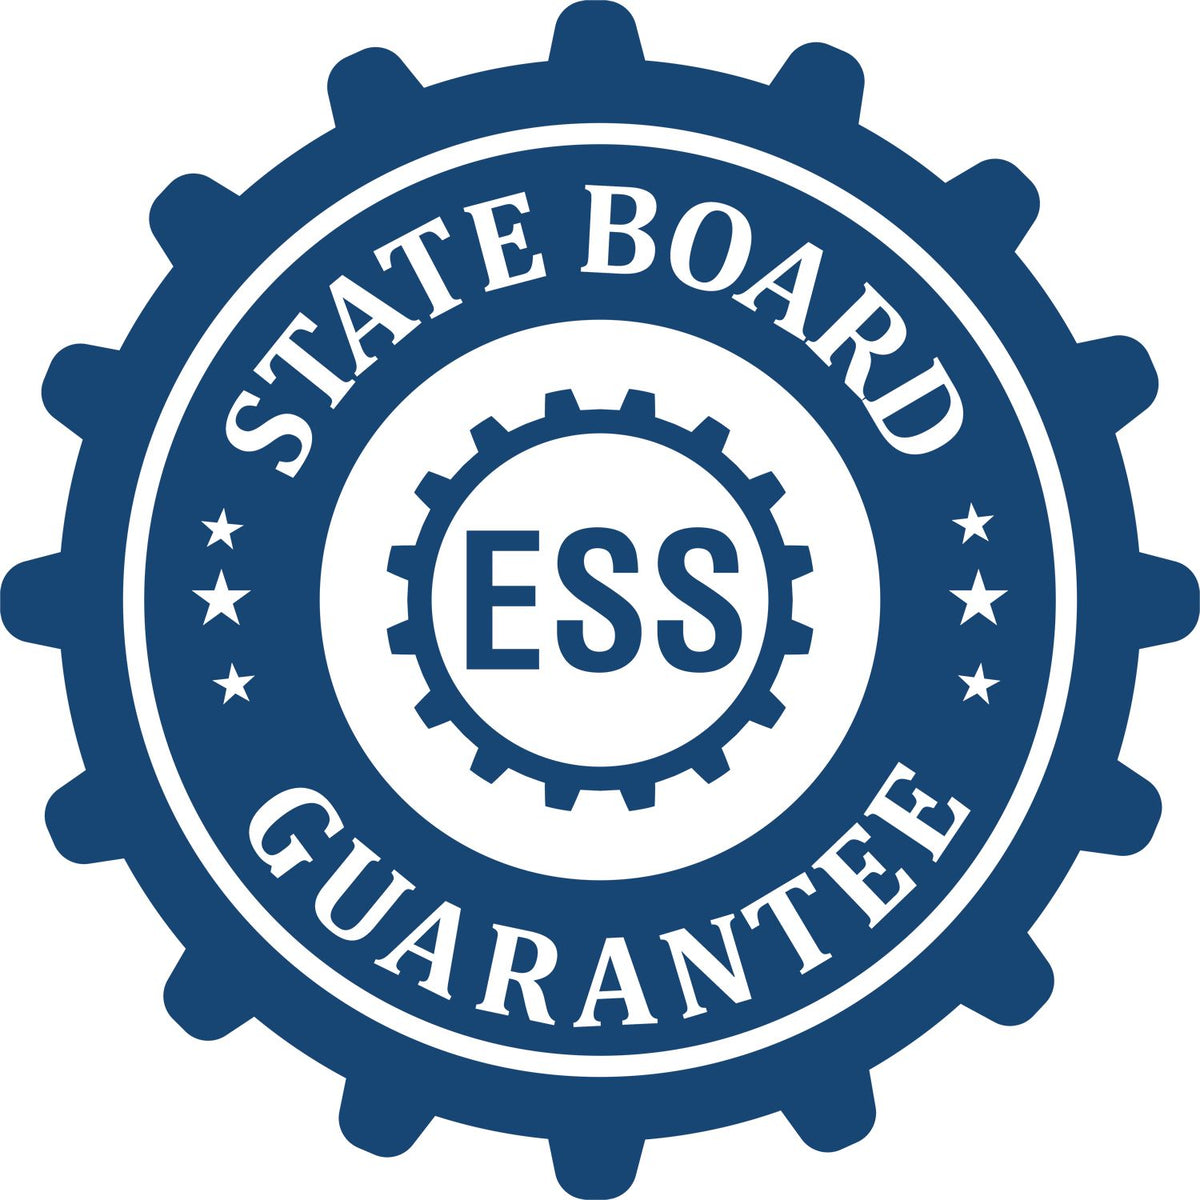 An emblem in a gear shape illustrating a state board guarantee for the Handheld District of Columbia Land Surveyor Seal product.